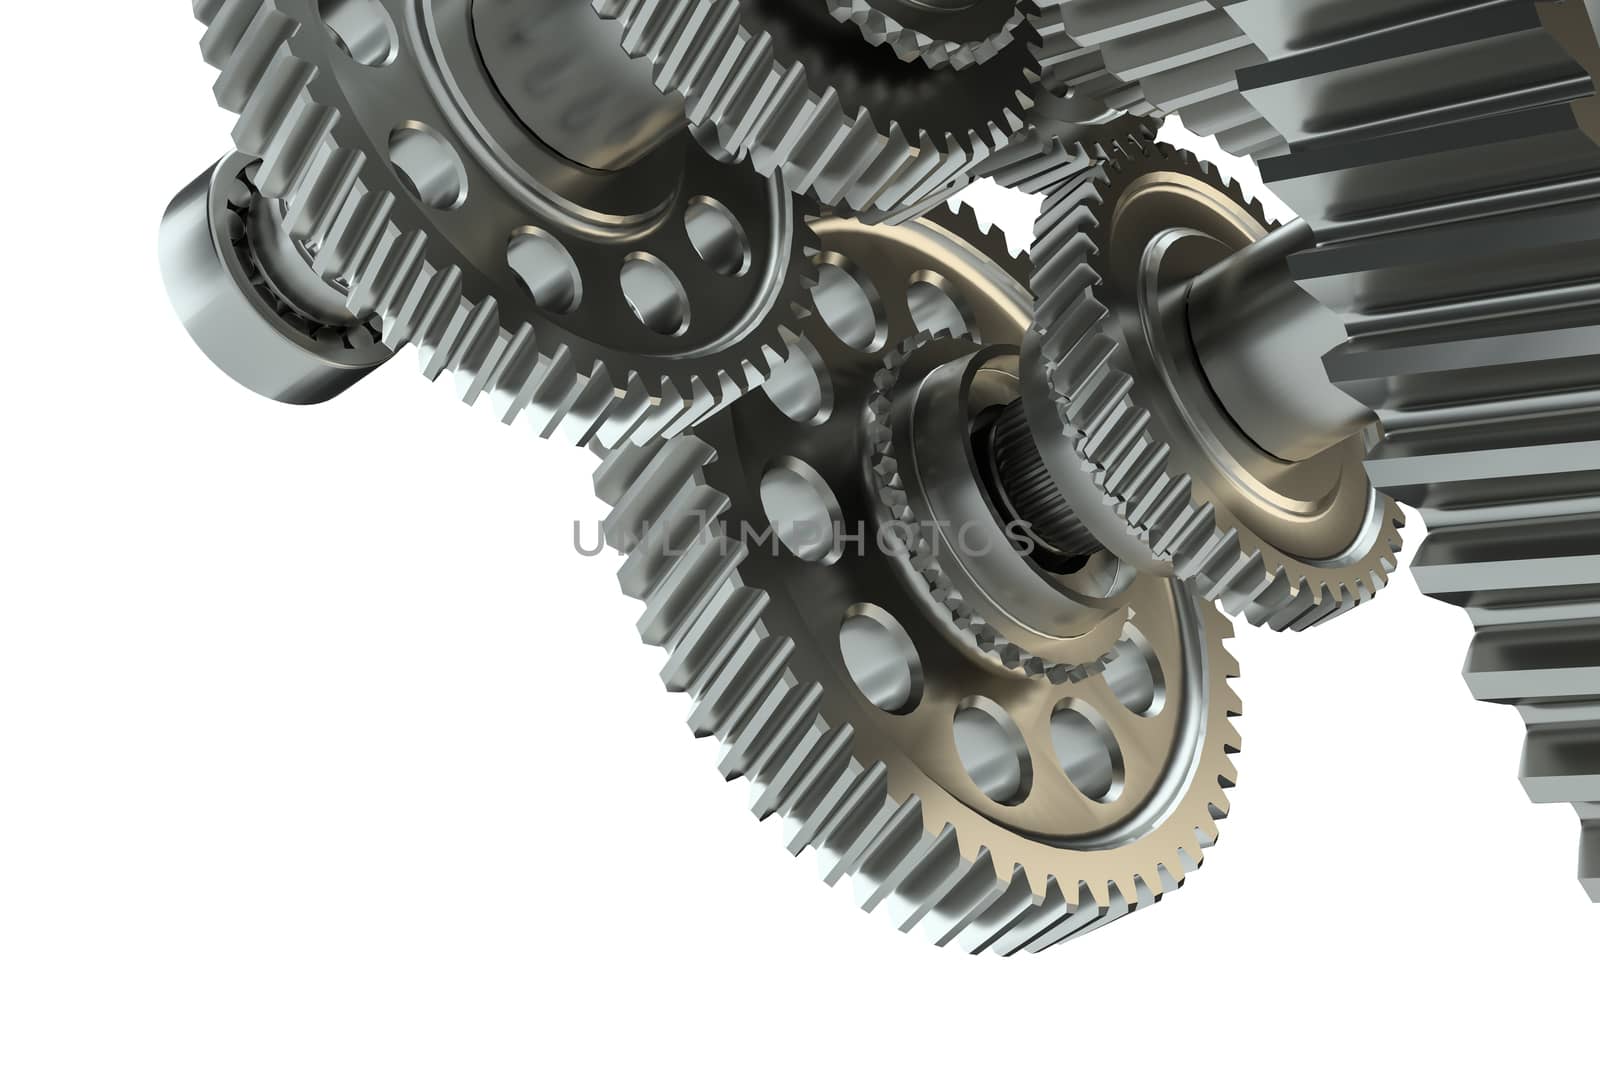 Engine gears wheels, closeup view. 3d illustration on white